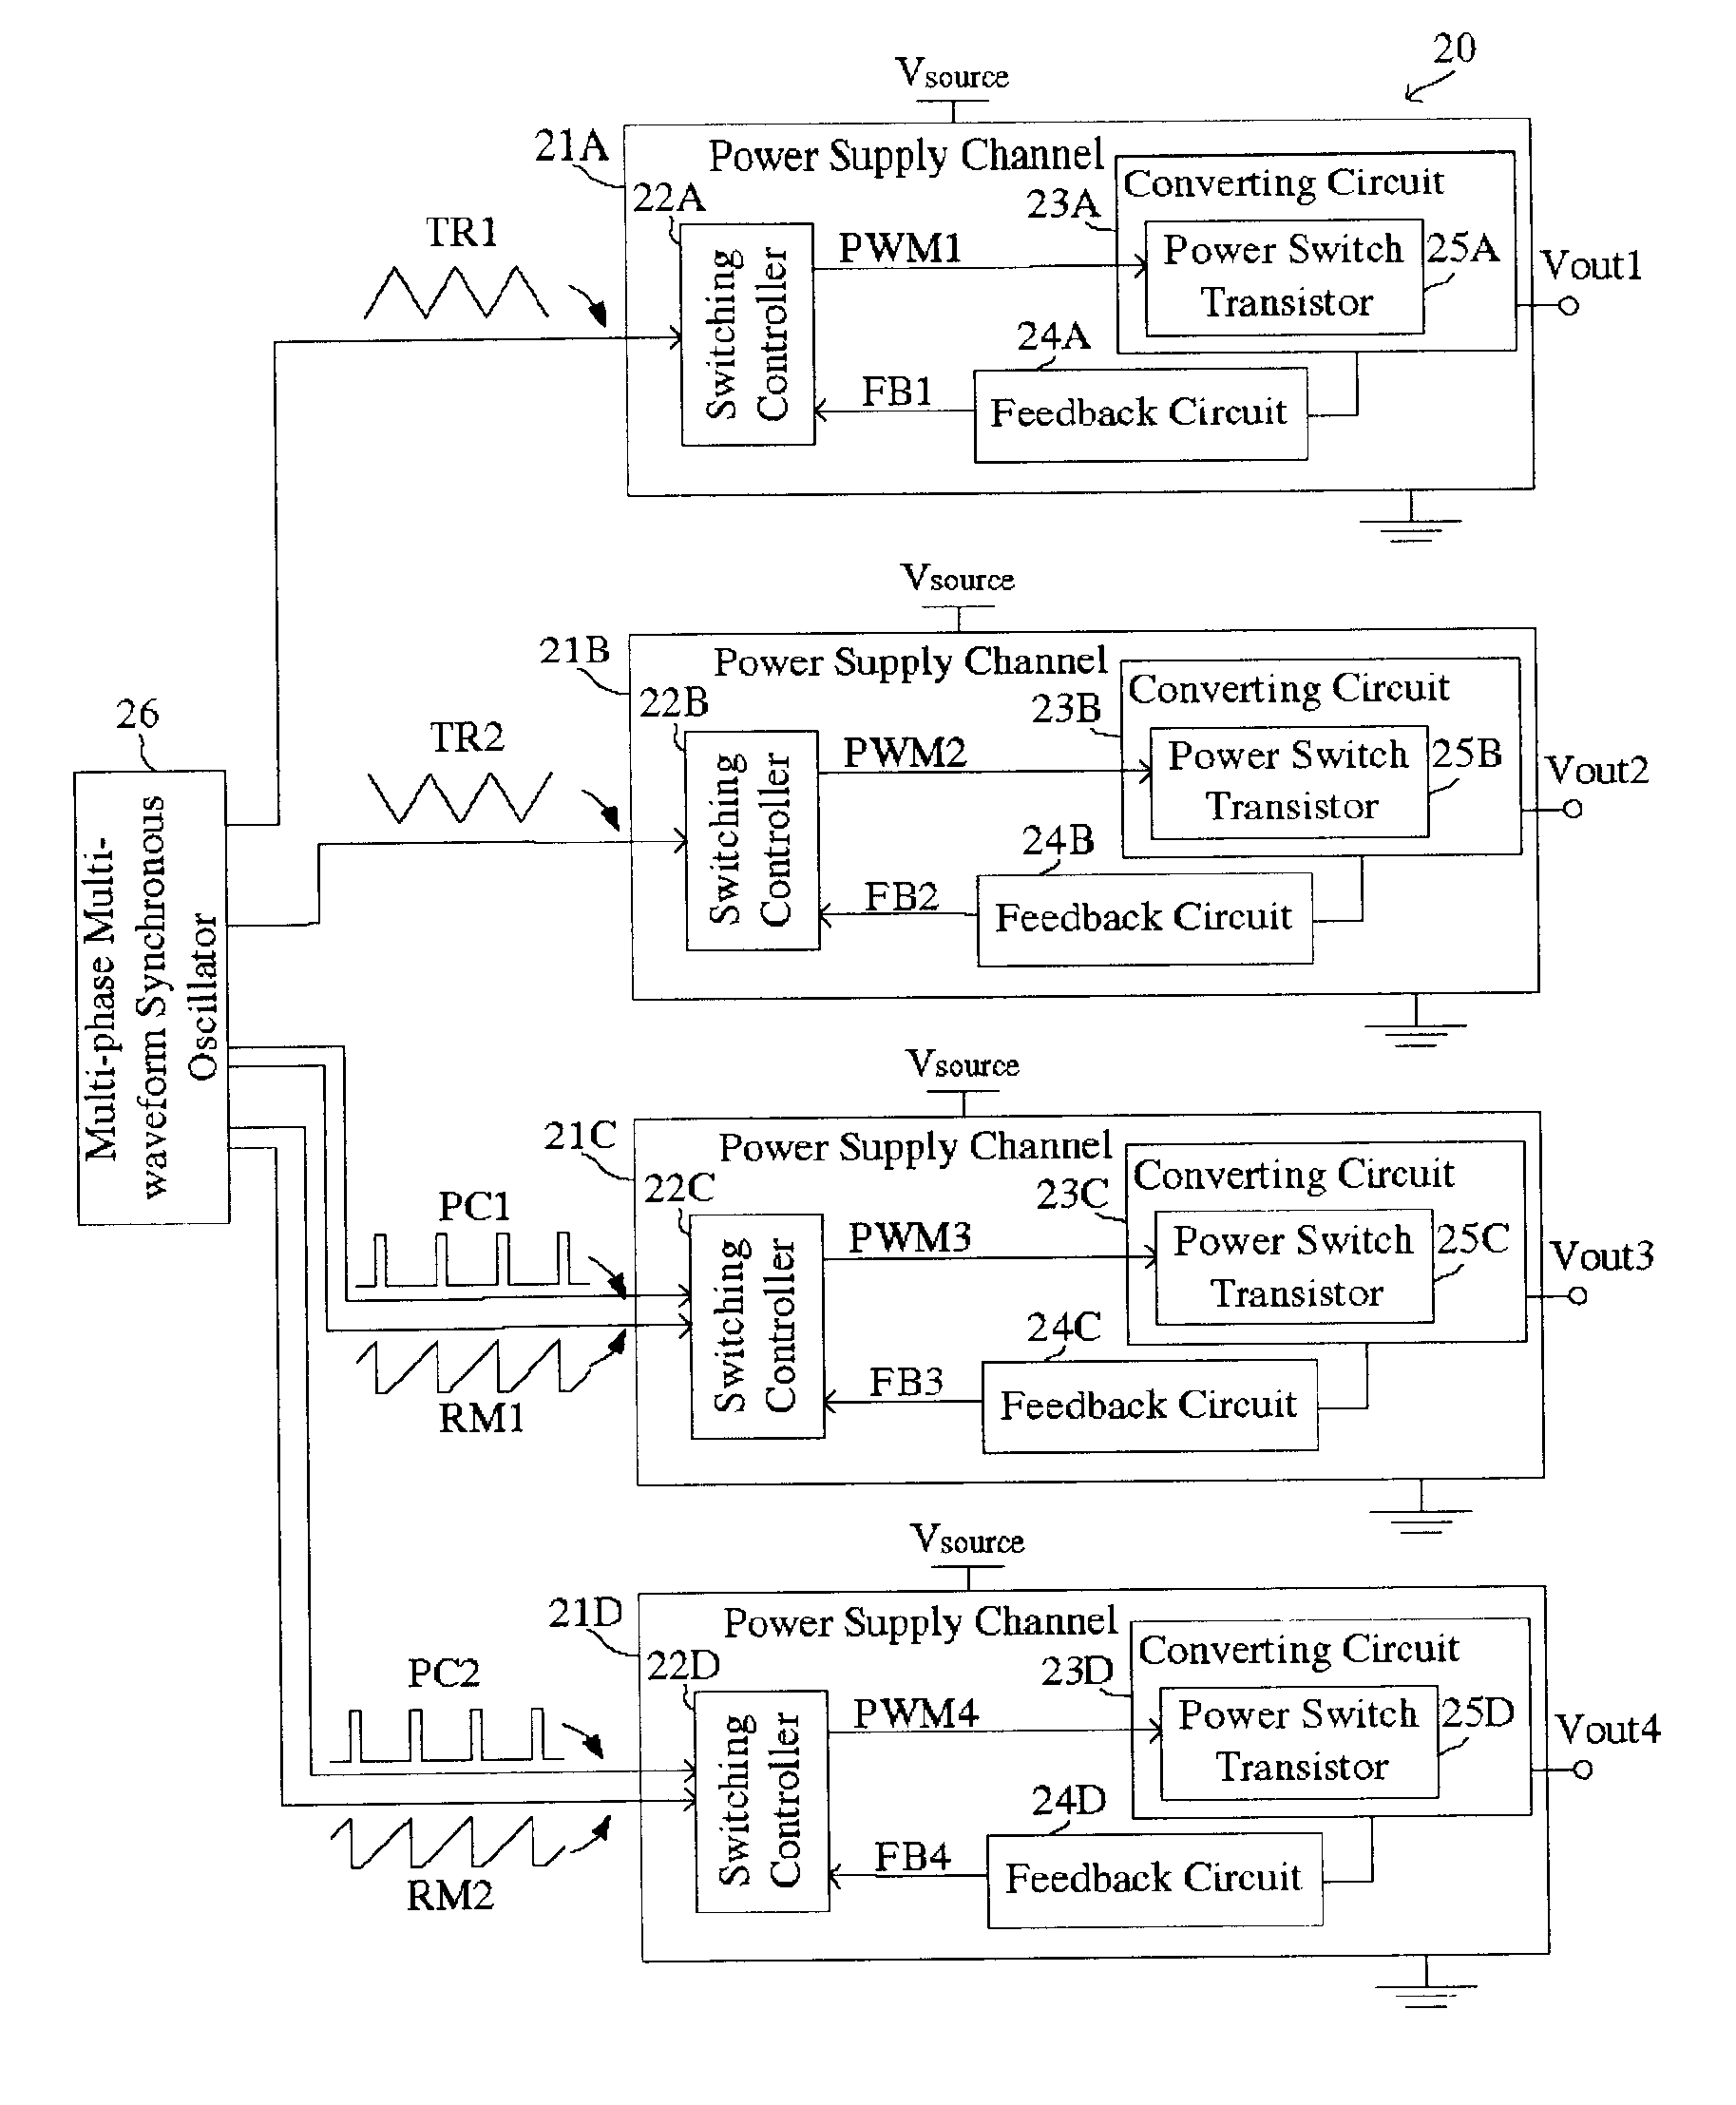 Switching DC-to-DC converter with multiple output voltages